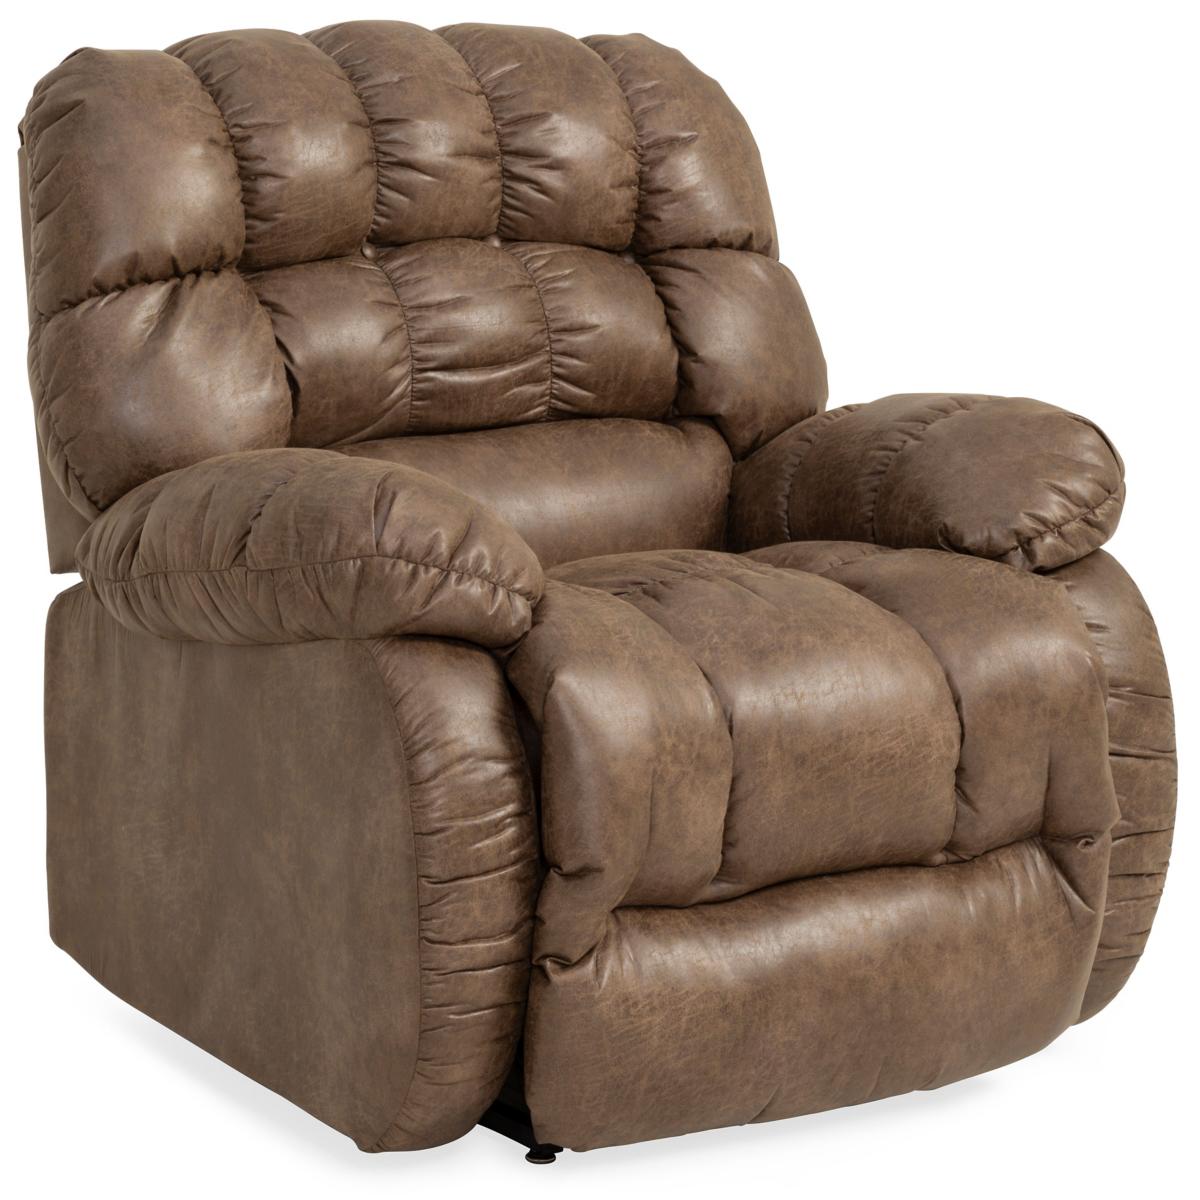 The Best Power Lift Chairs for Sale at Star Furniture